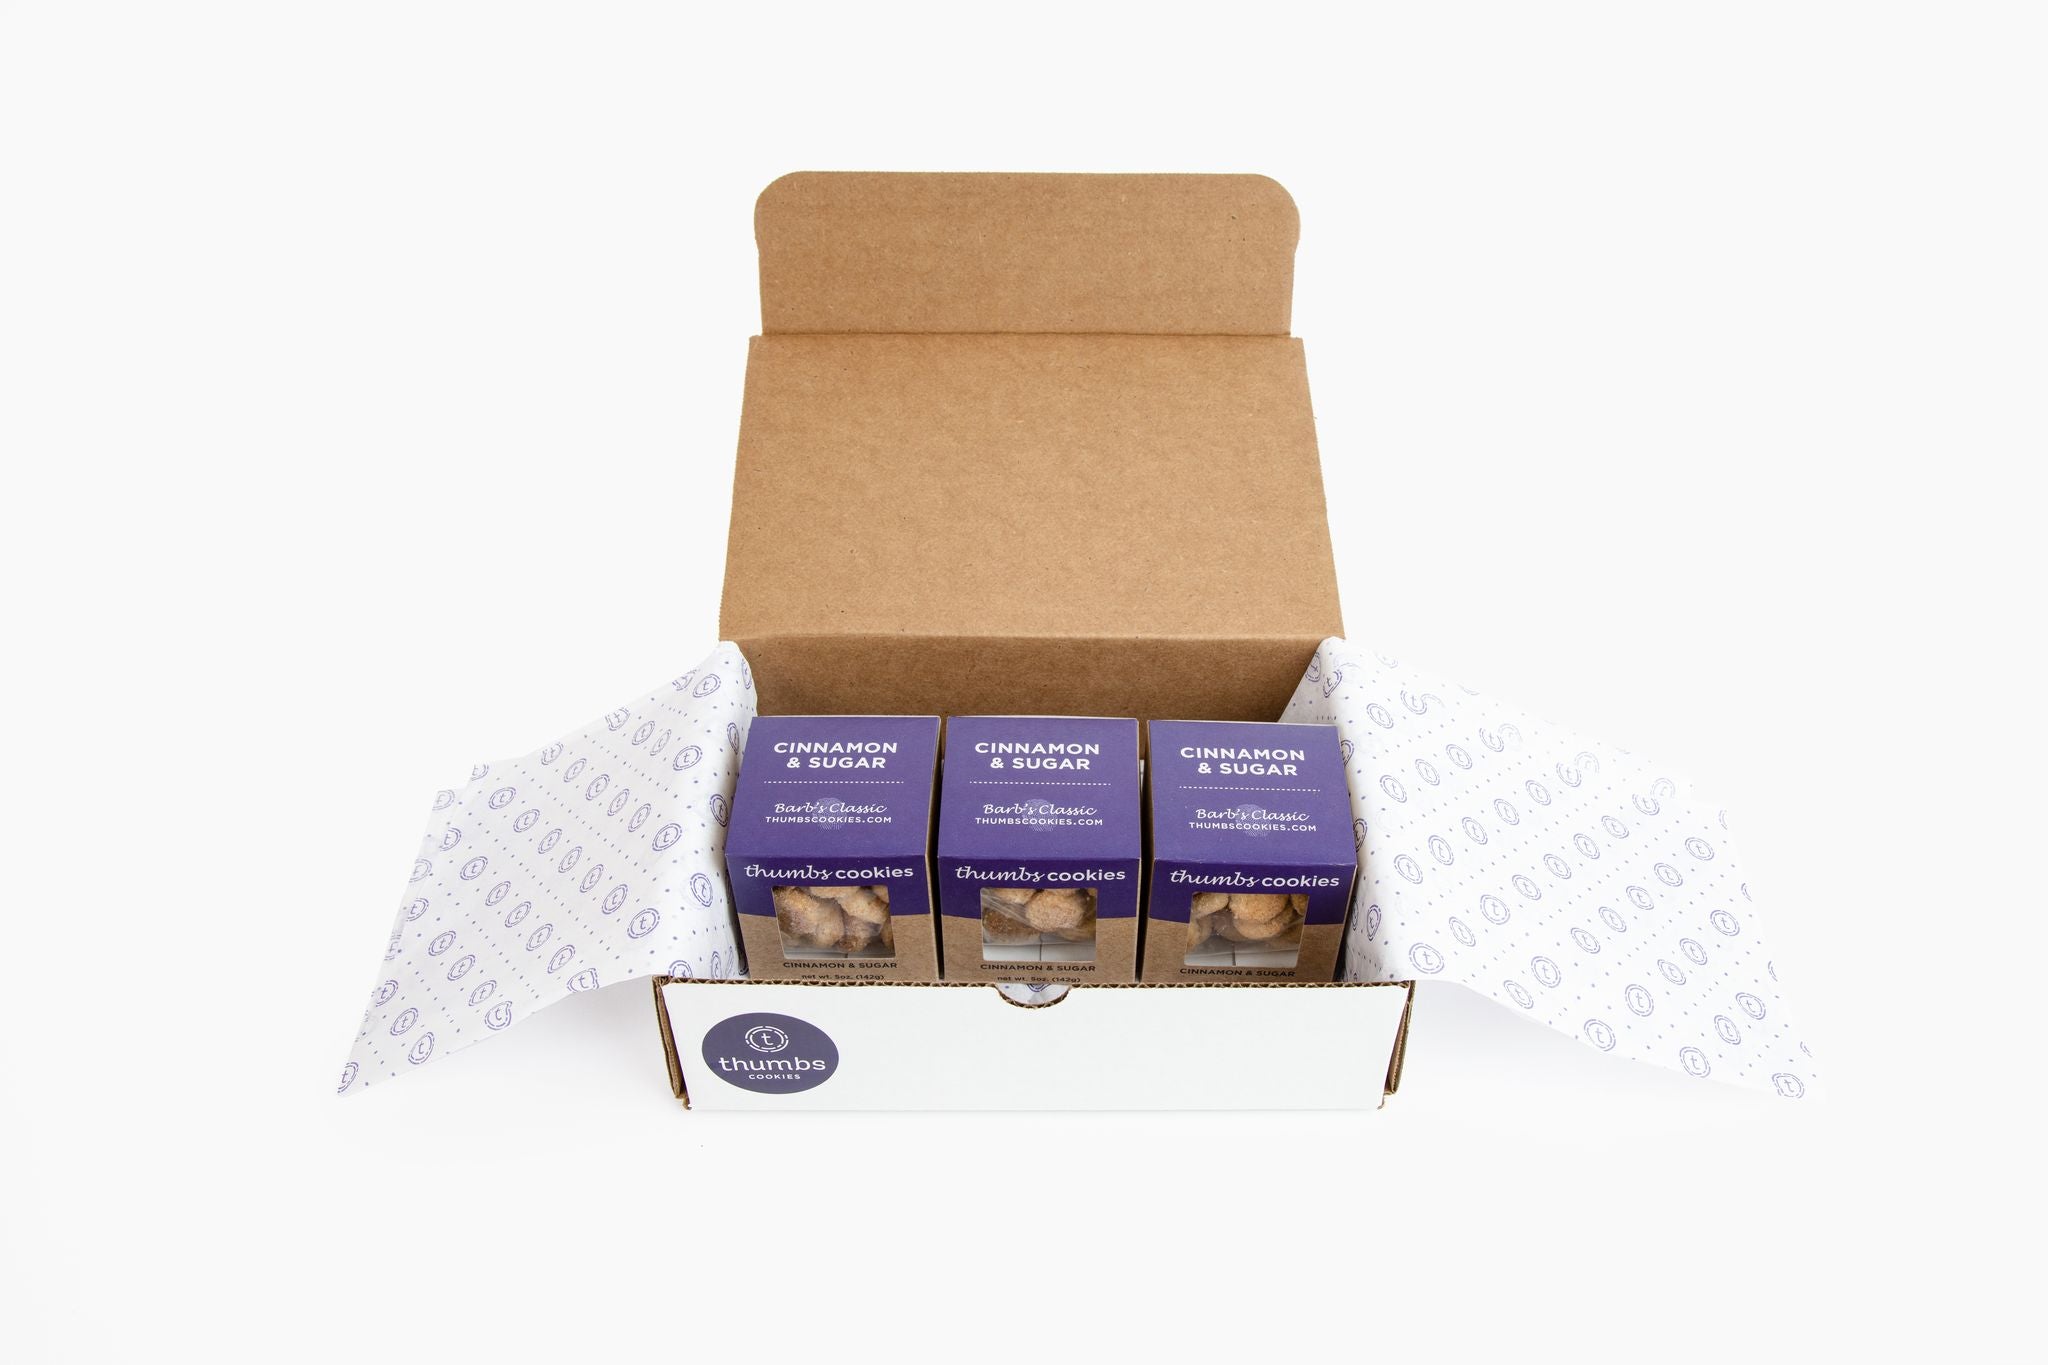 Thumbs Cookies Monthly Subscription Box (Free Shipping)